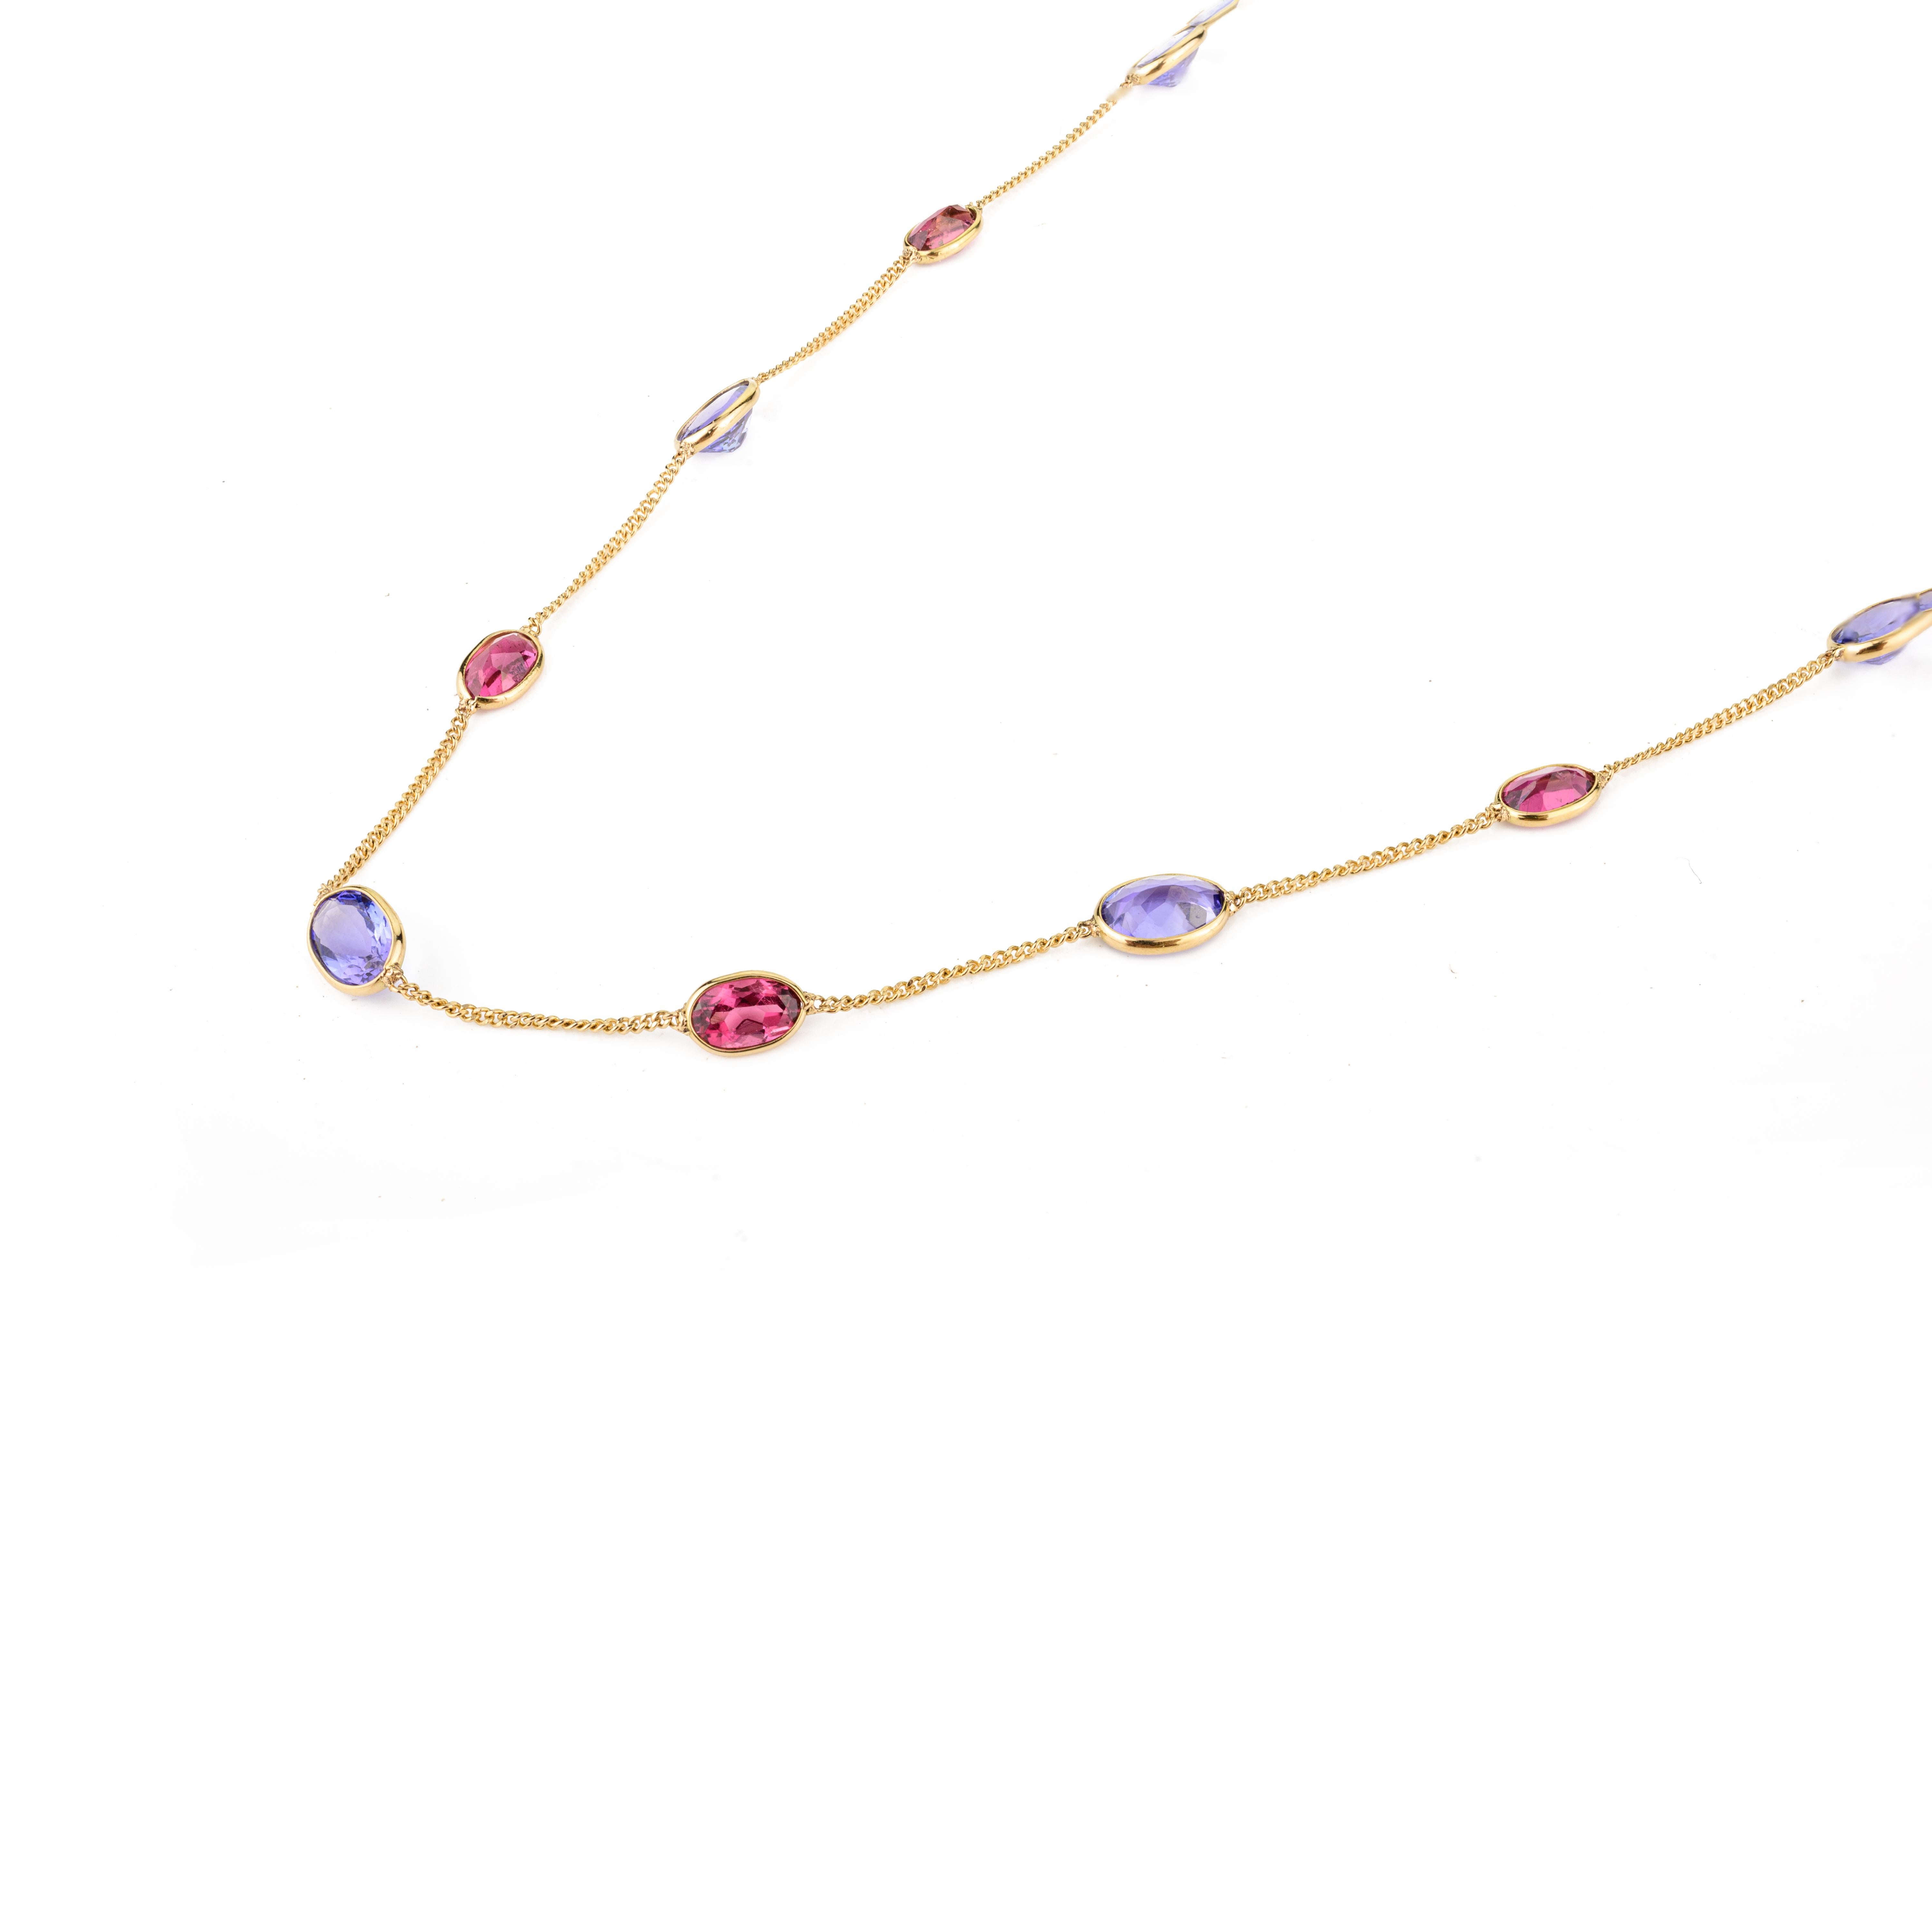 Modern 18k Yellow Gold Tanzanite and Tourmaline Station Chain Necklace Gift for Women For Sale